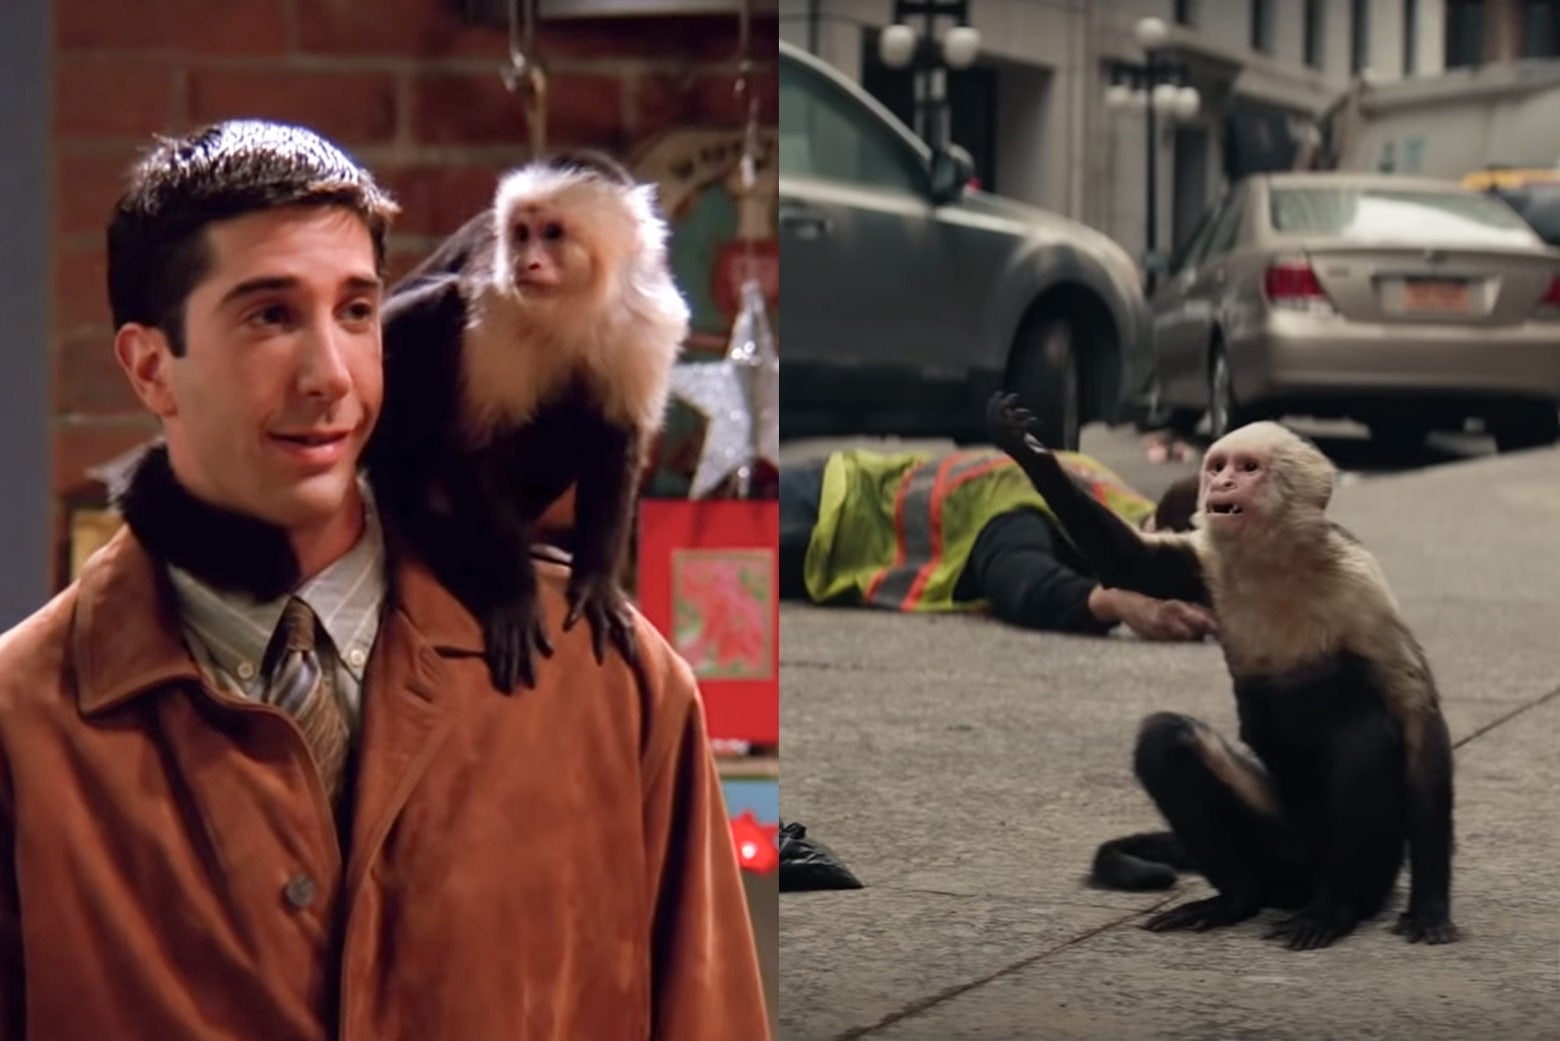 On the left, Ross (David Schwimmer) with Marcel on his shoulder. On the right, Ampersand in Y: The Last Man.